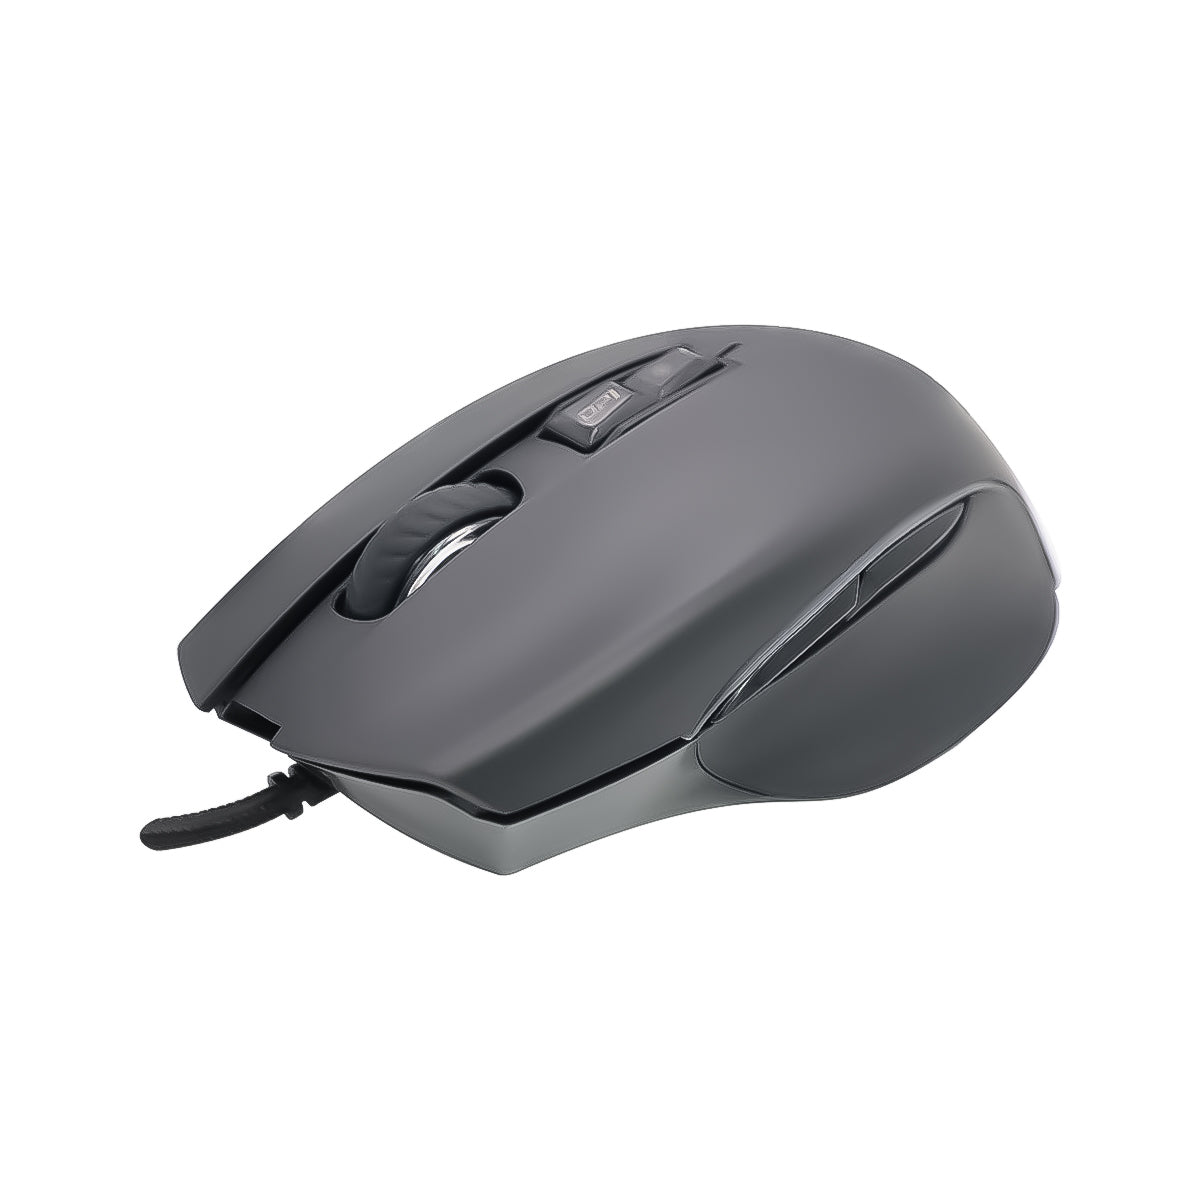 DELTA FORCE DGM775 USB GAMING MOUSE 7200